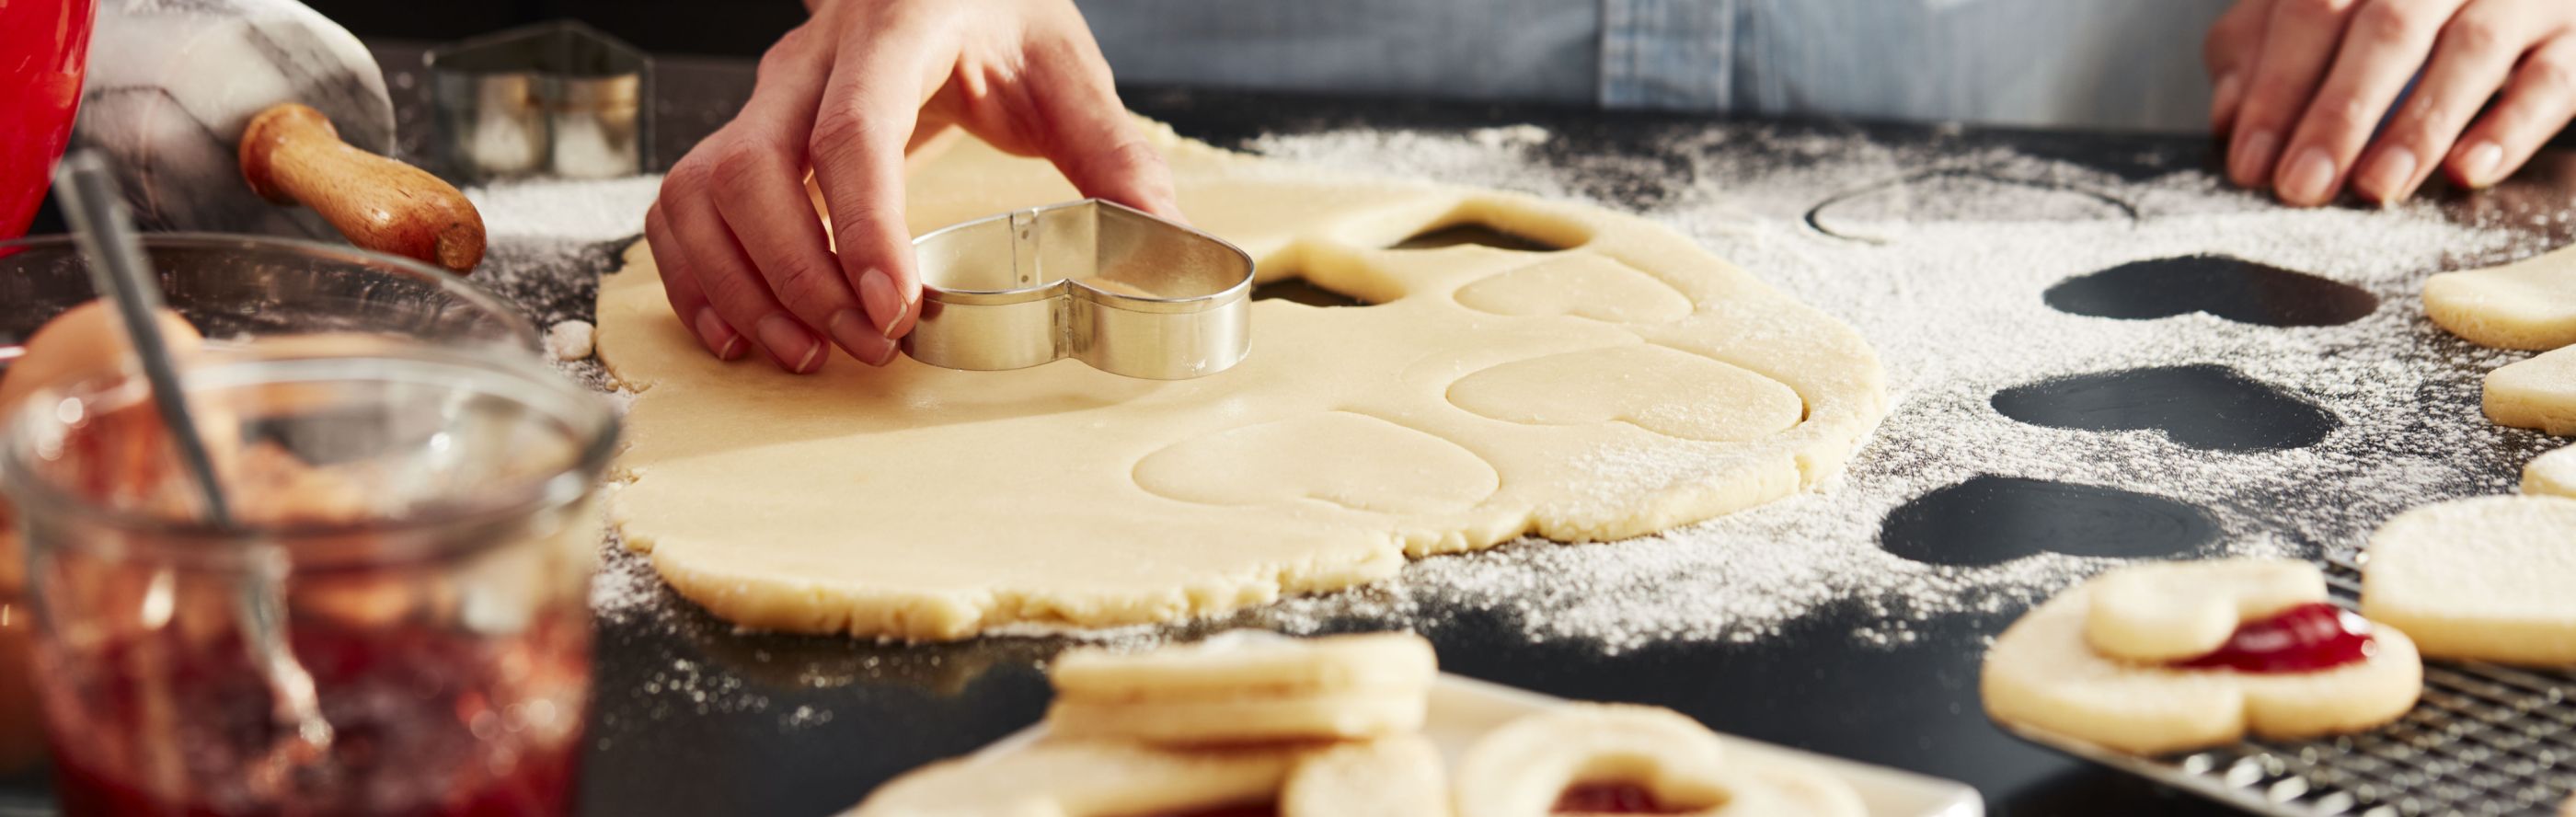 Woman cutting out cookies with a heart-shaped cookie cutter.